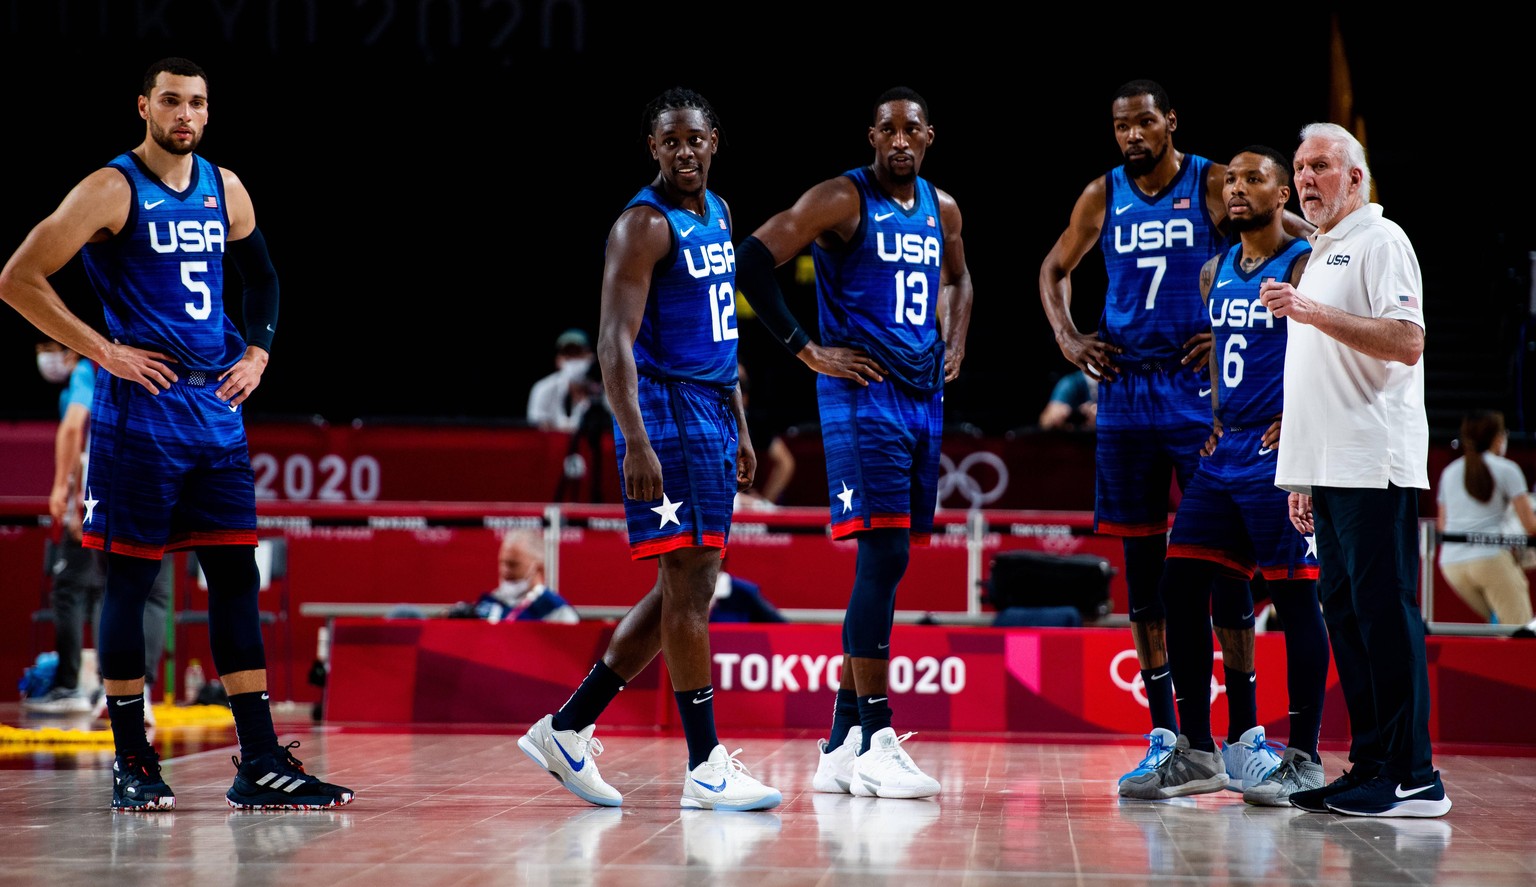 210725 Zachary Lavine, Jrue Holiday, Edrice Femi Adebayo, Kevin Wayne Durant, Damian Lillard and Gregg Popovich, head coach of USA, in the basketball game between France and USA during day 2 of the To ...